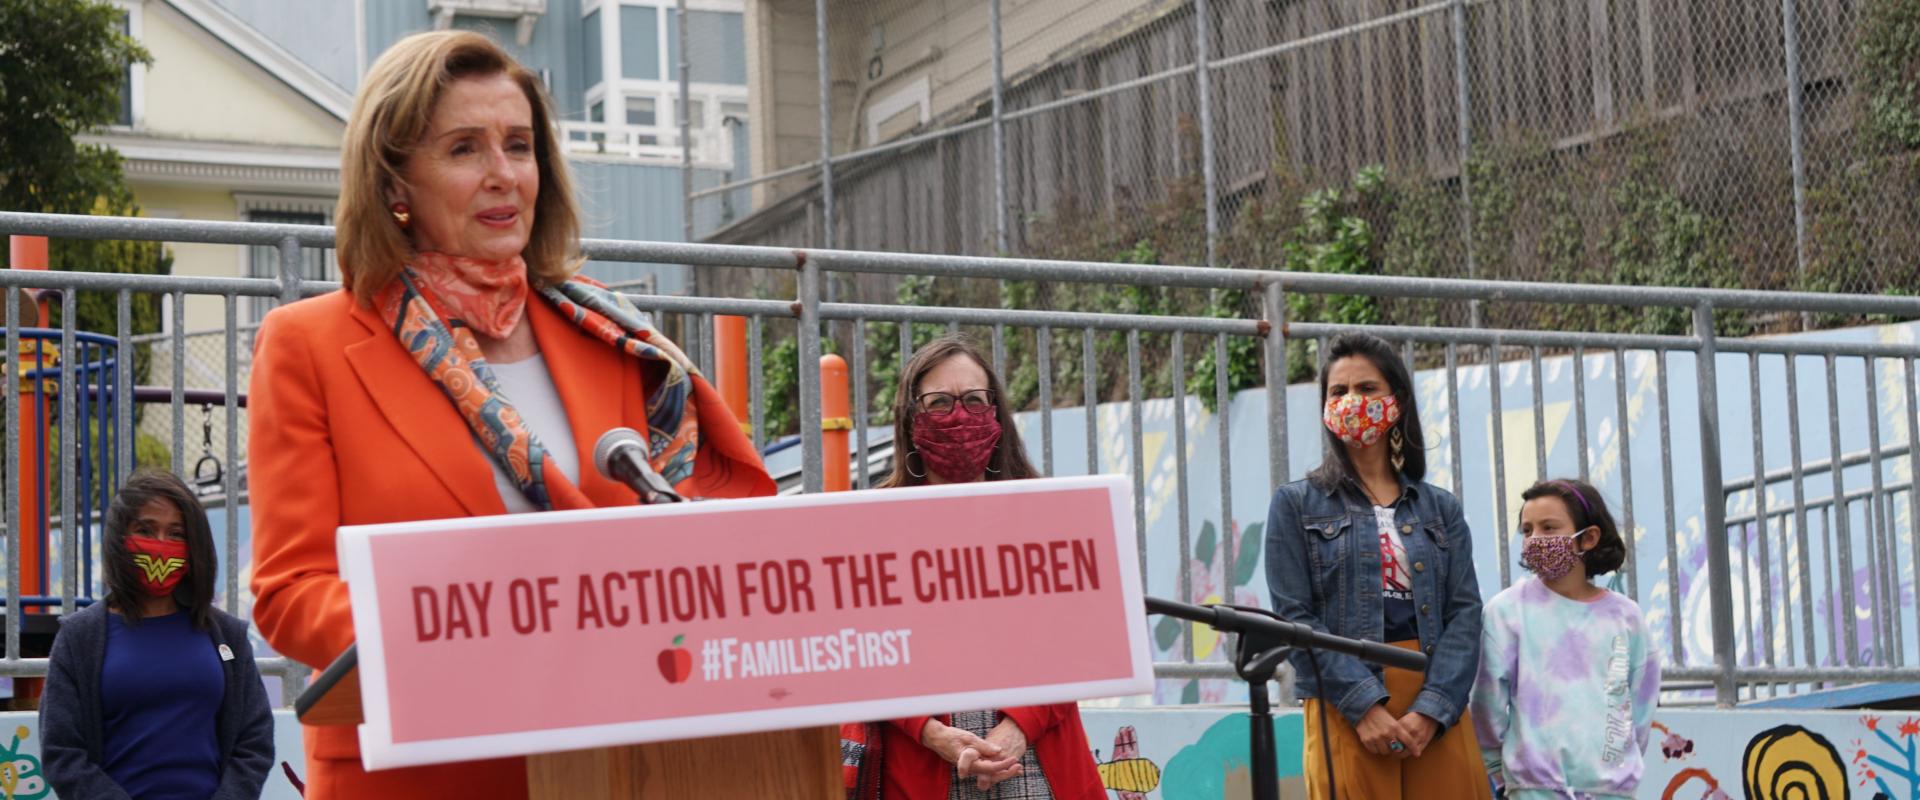 Congresswoman Nancy Pelosi joined San Francisco educators and leaders at Mission Education Center Elementary School to highlight the impact of the pandemic on children and families;  underscoring the urgent need for the Senate to pass the Heroes Act, whic